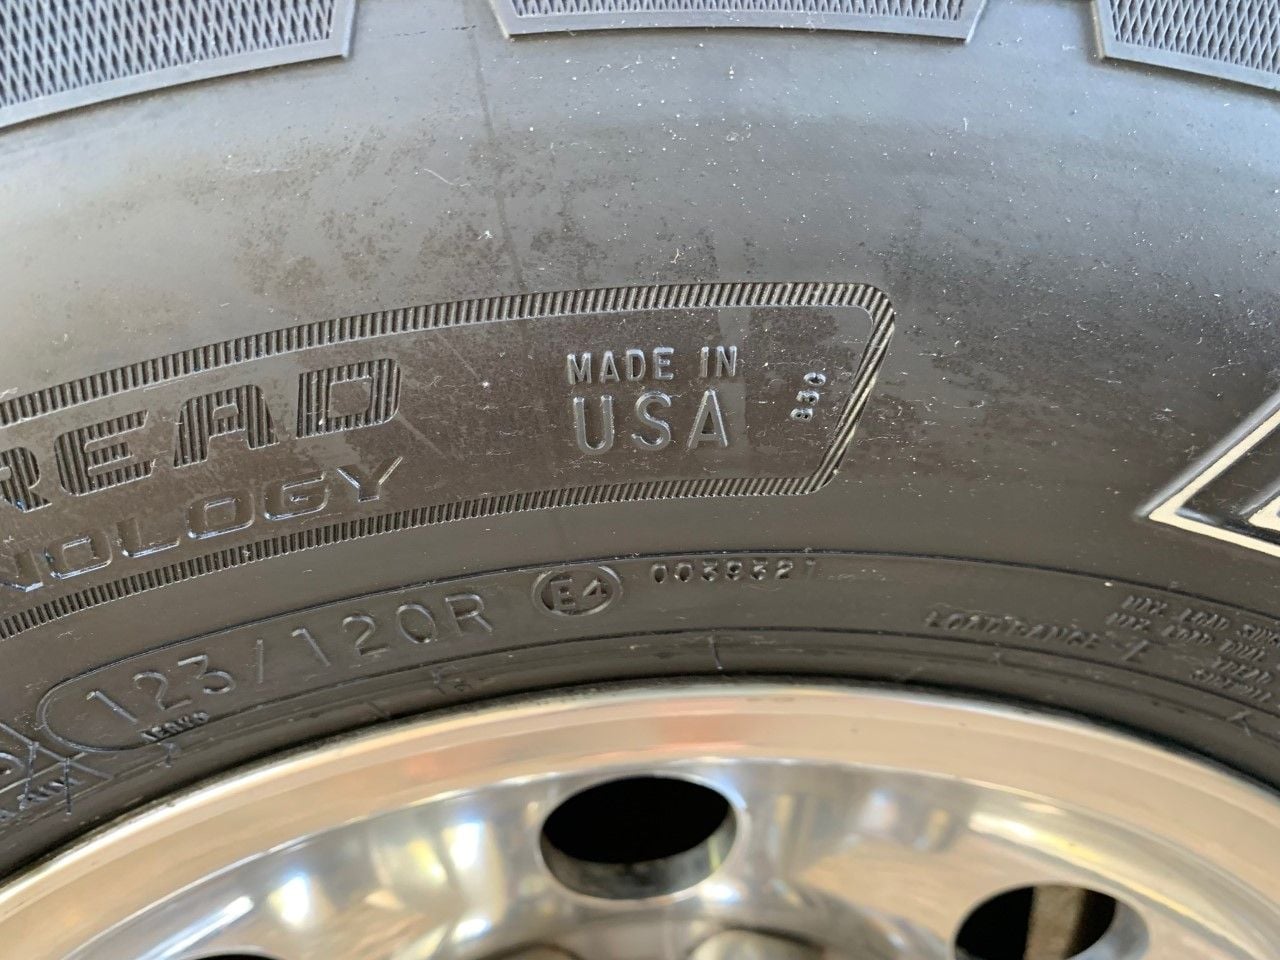 Look at what happened to my Goodyear Wrangler Trailmark - Page 3 - Ford  Truck Enthusiasts Forums